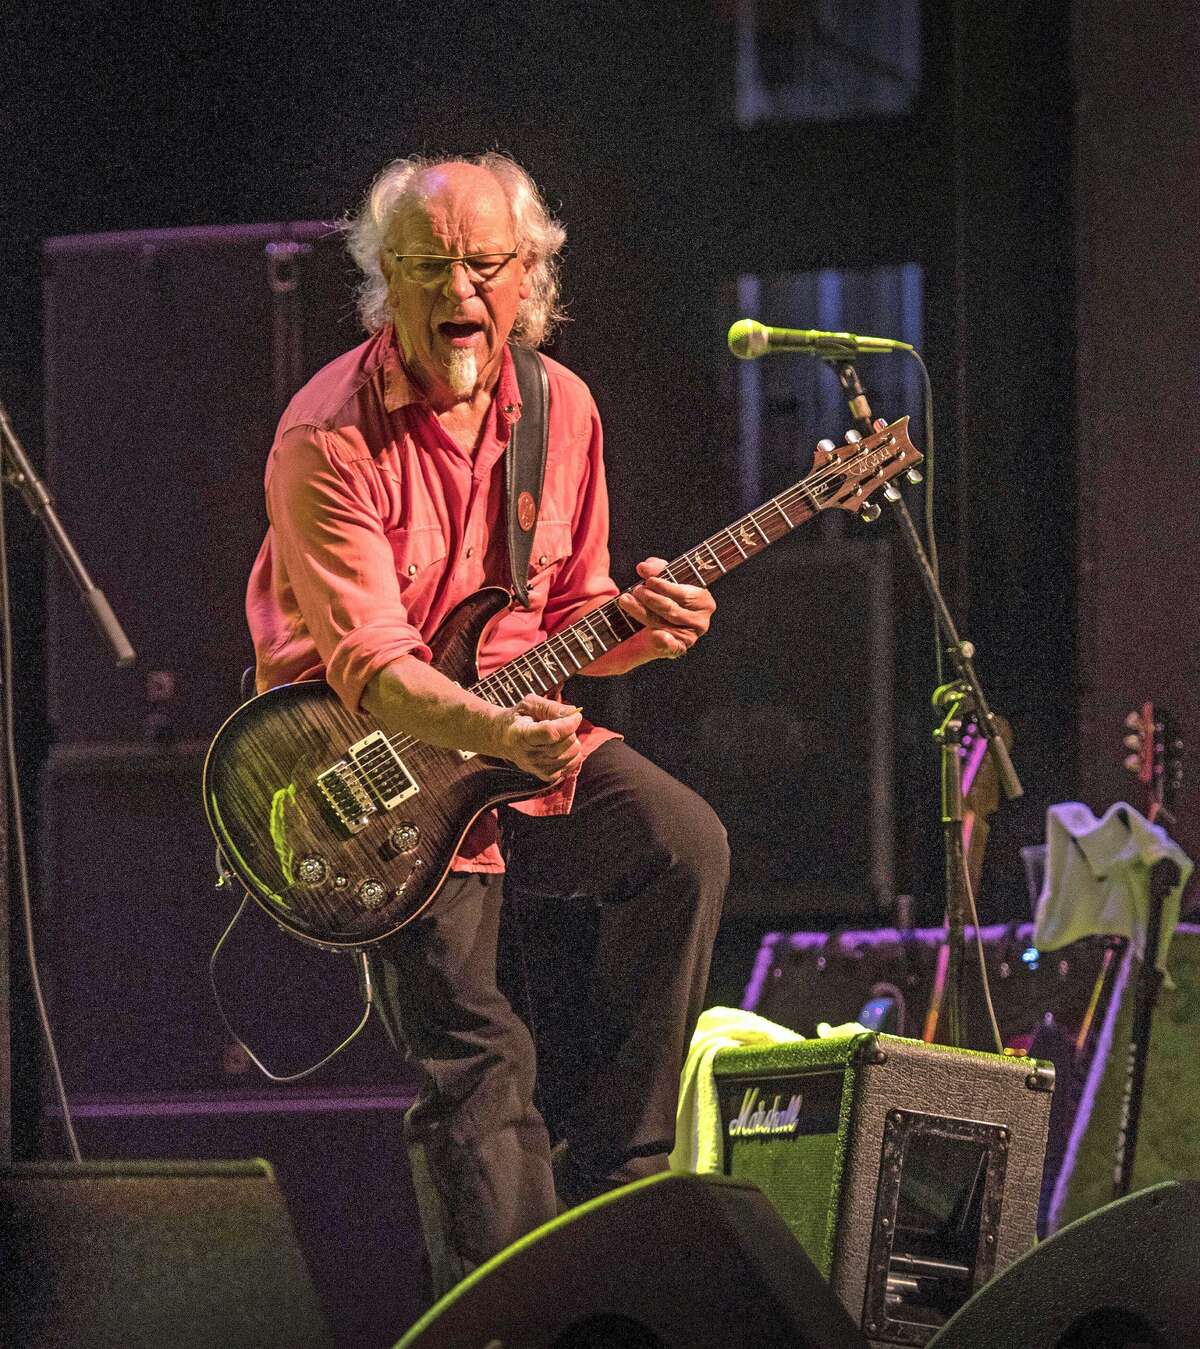 Martin, who was the guitarist from Jethro Tull from 1968 to 2011, returns to the Wildey Theatre on Jan. 21-22 for the Aqualung 50th Anniversary Tour.